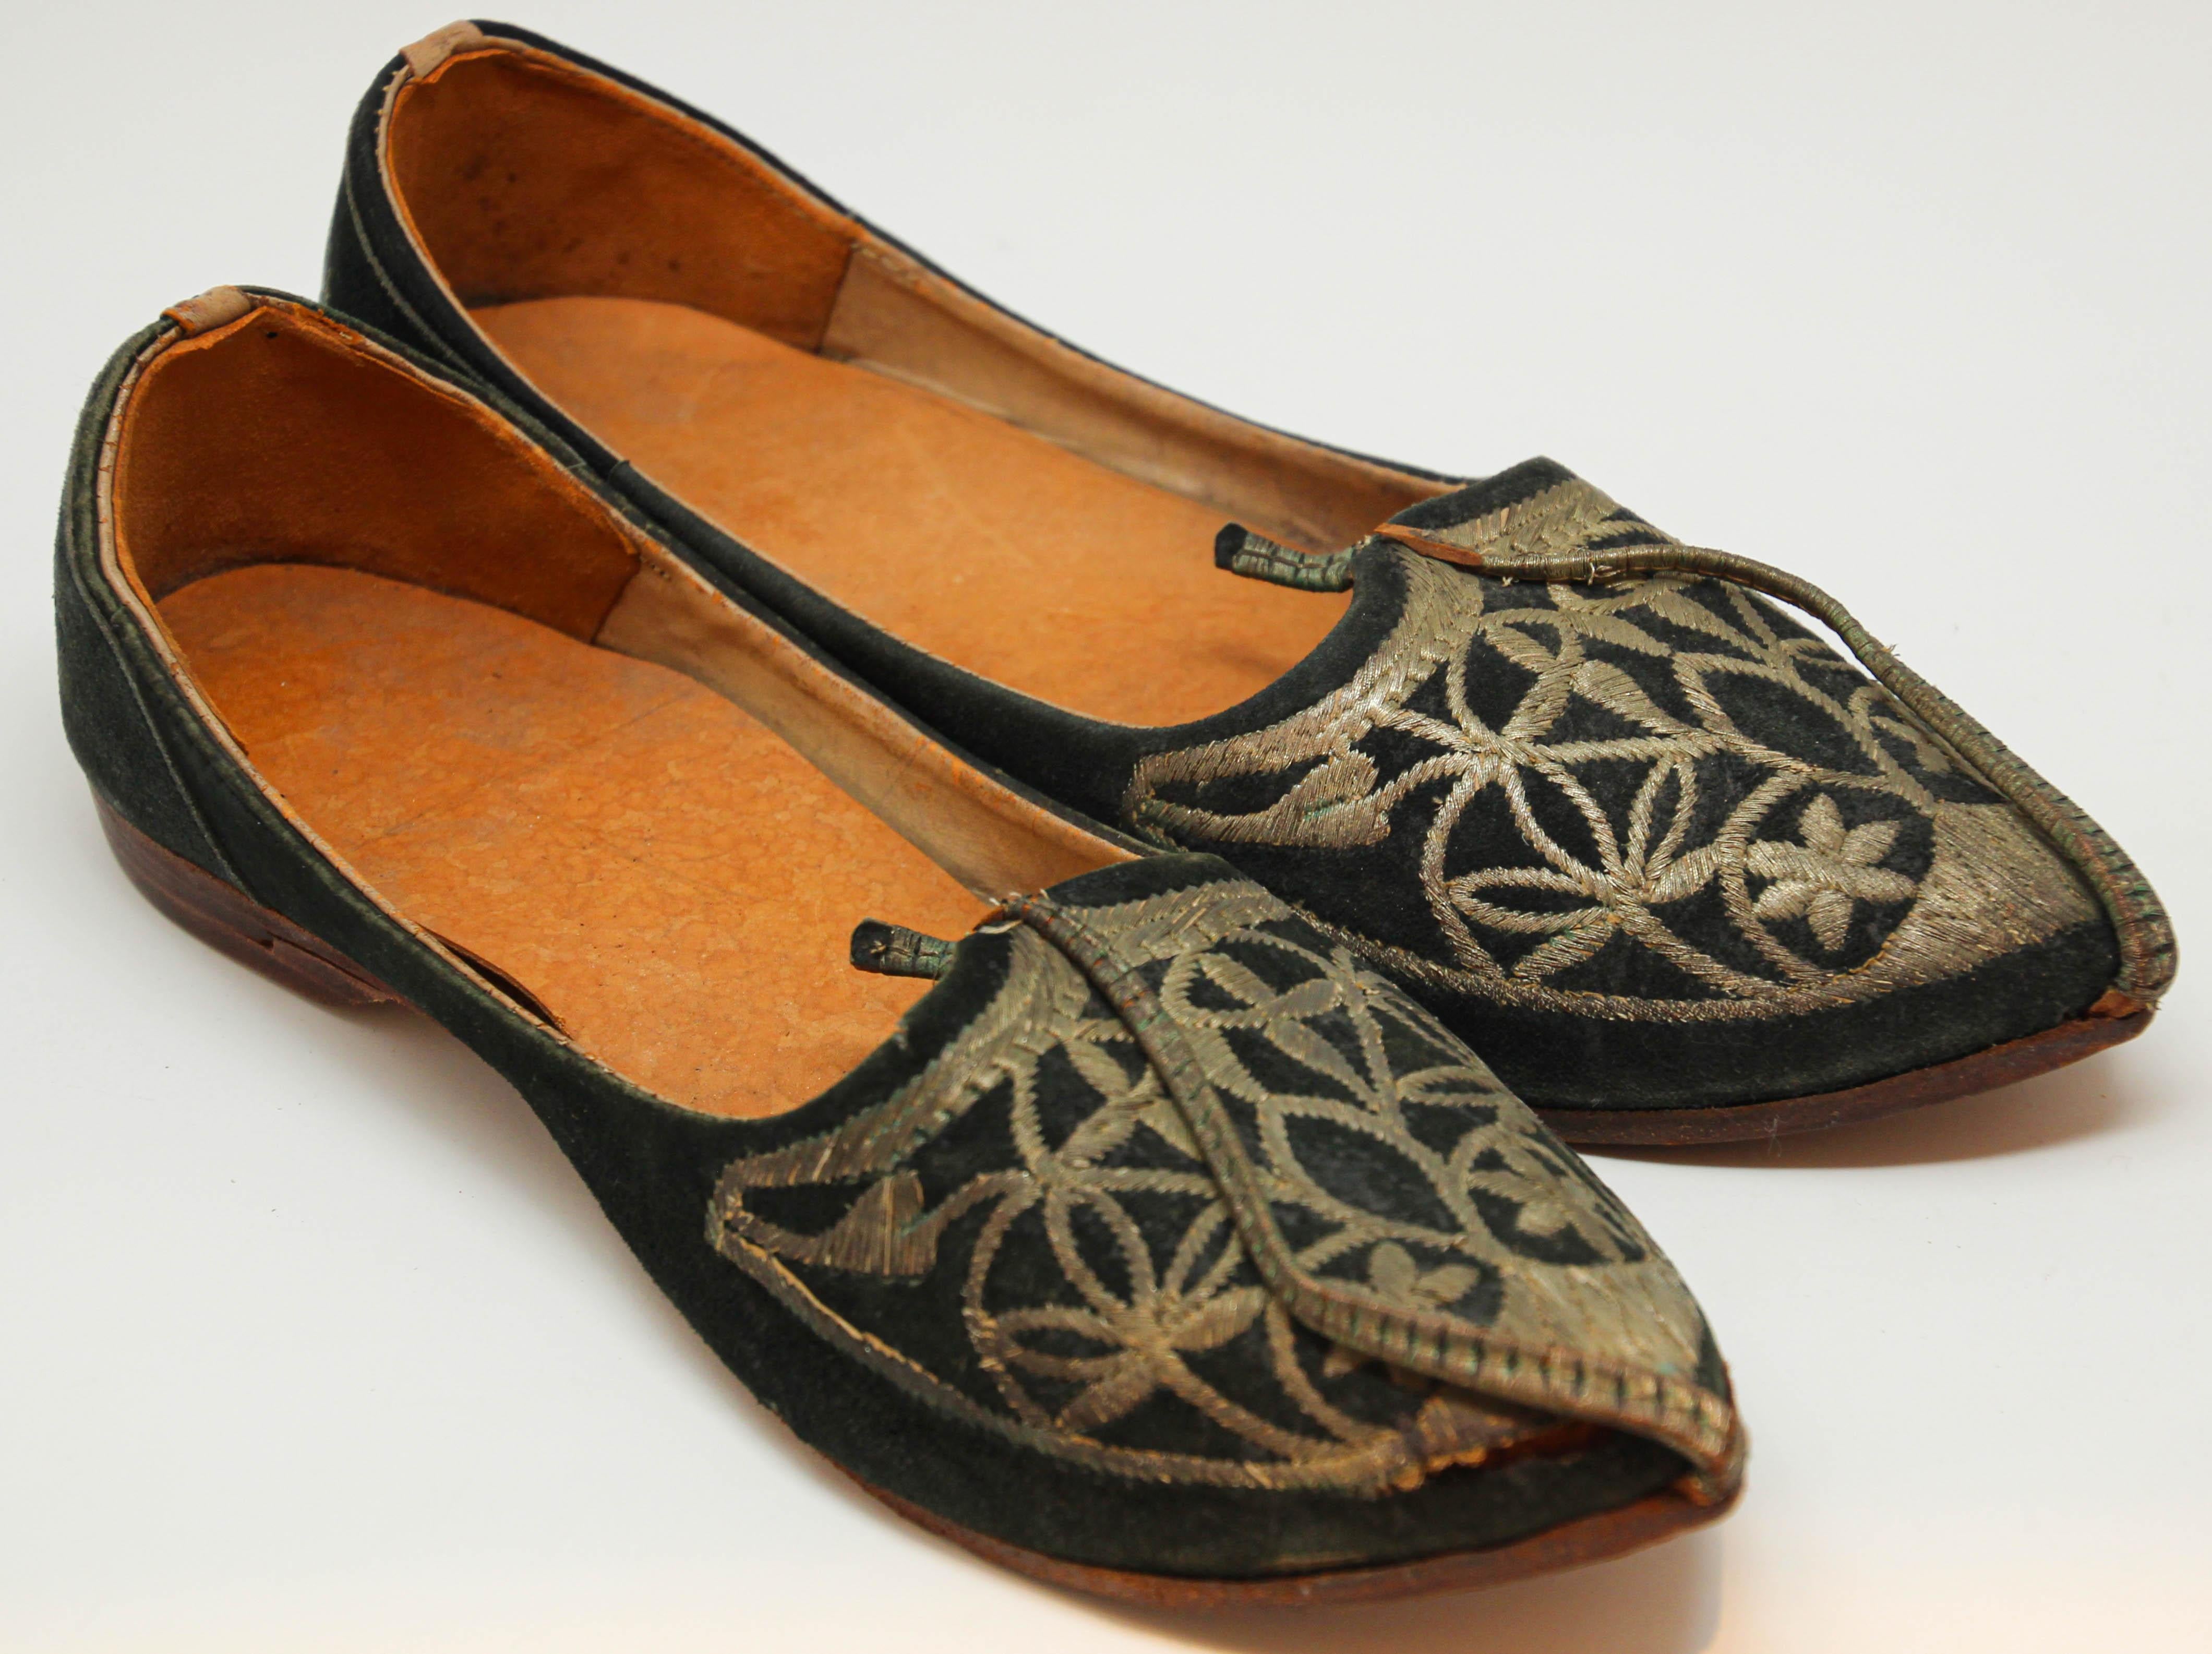 Moorish Mughal style Curled Toe Black Leather Shoes from Tony Duquette Estate For Sale 8